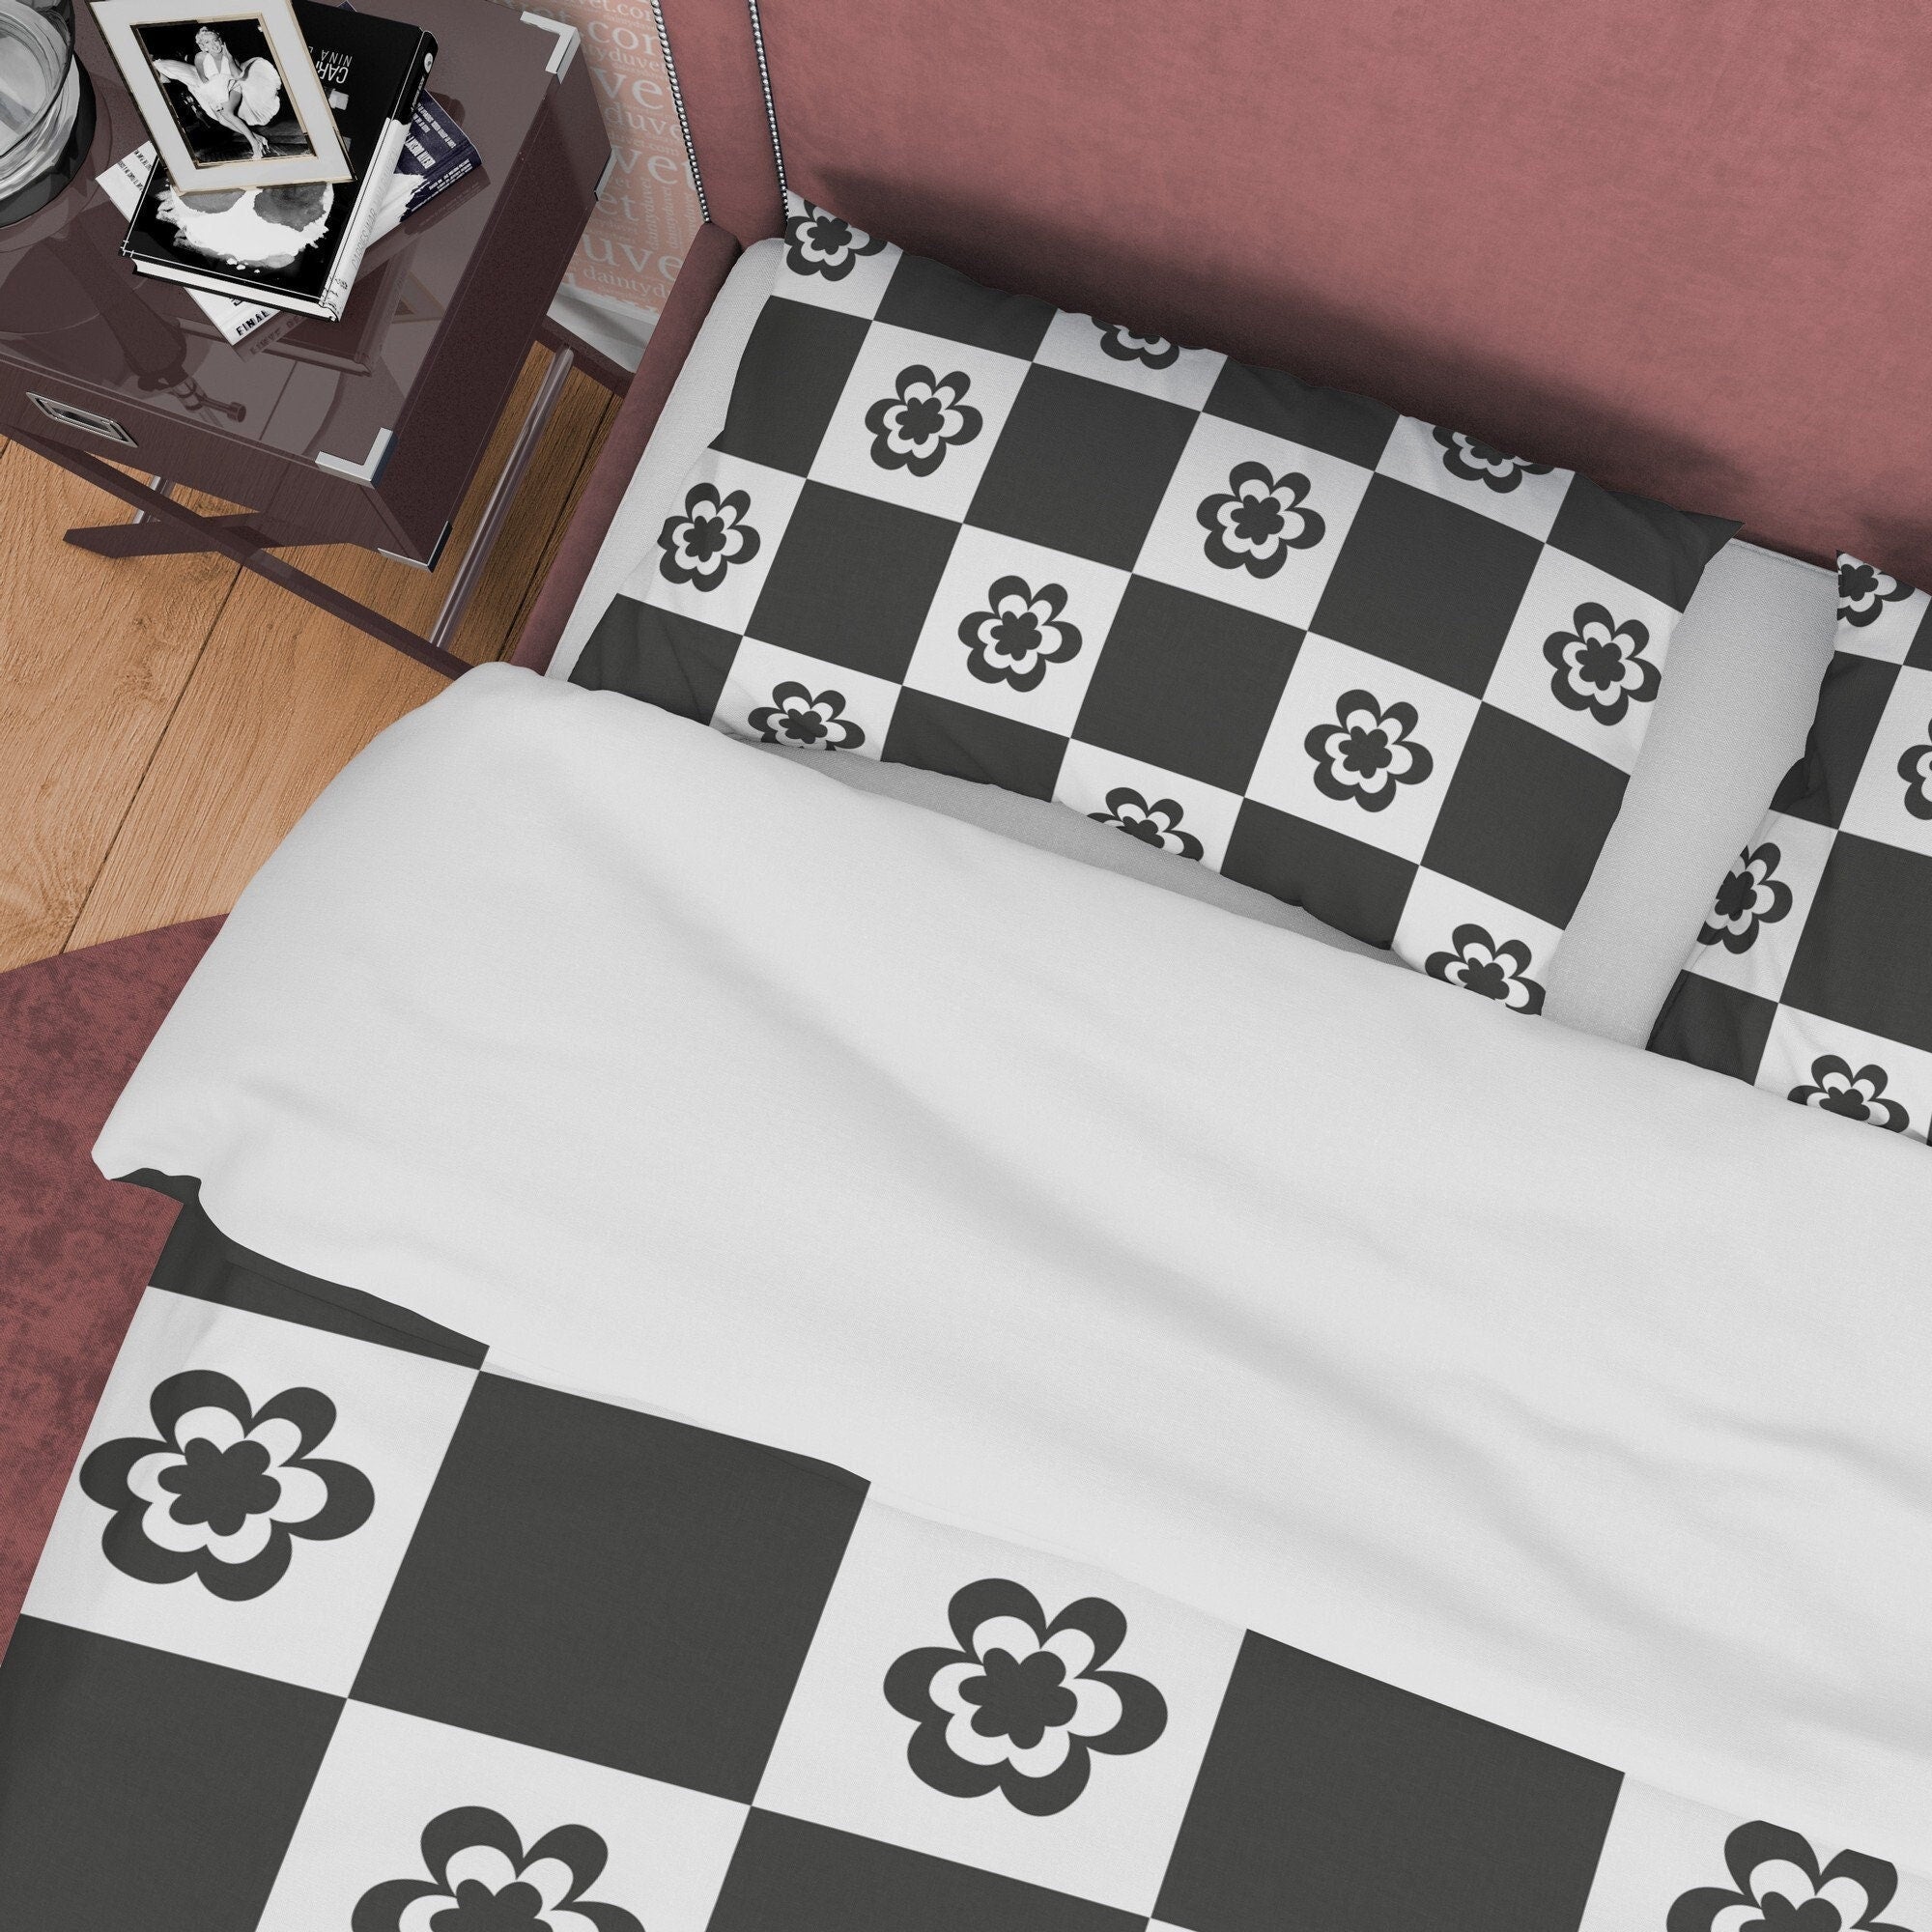 Checkered Floral Blanket Cover Black and White Duvet Cover Set, Retro Printed Bedding Set, 90s Nostalgia Quilt Cover, Groovy Bedspread